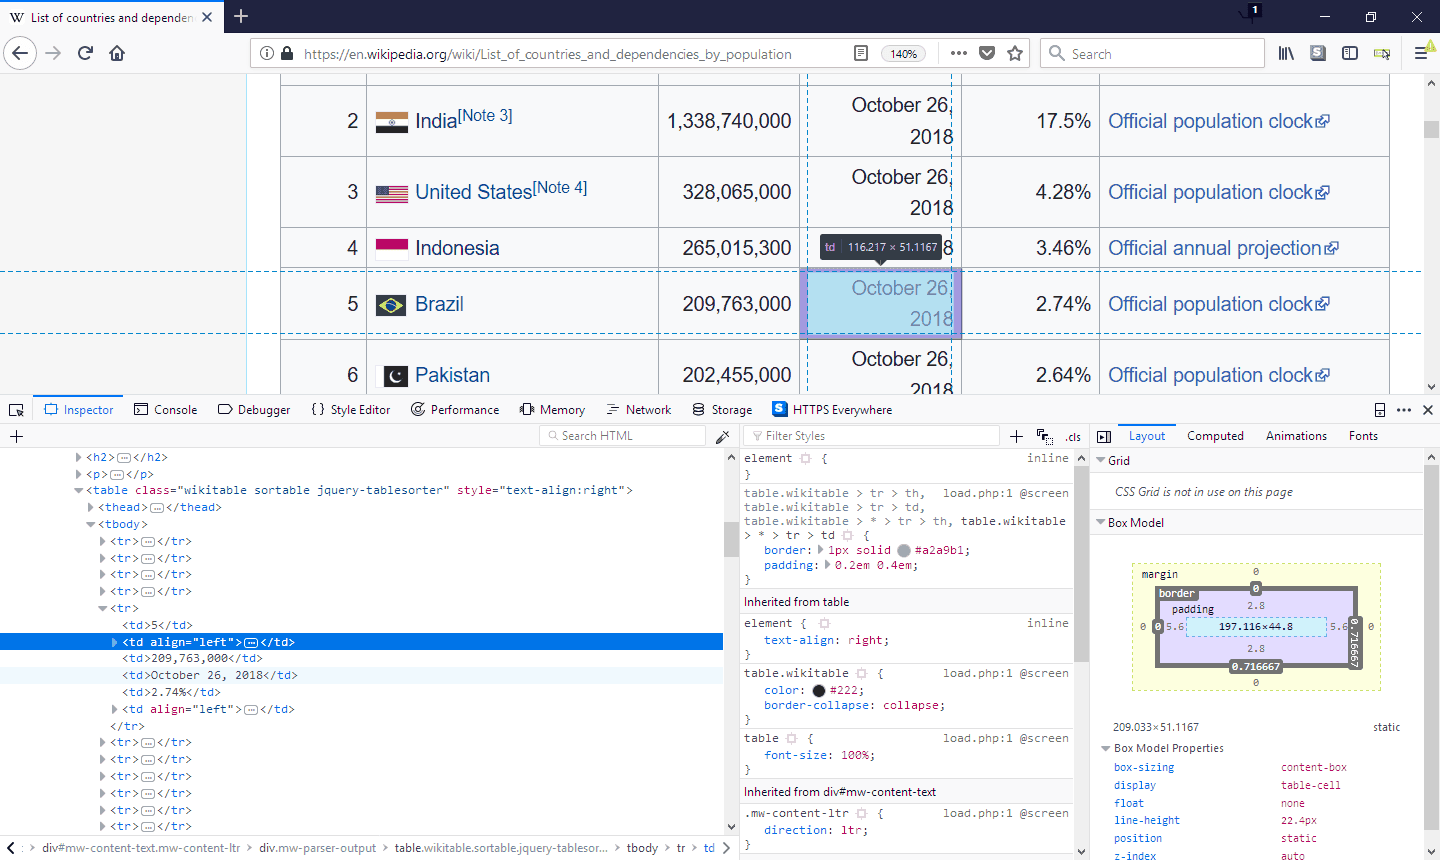 FireFox Dev Tools Window with a Section Highlighted